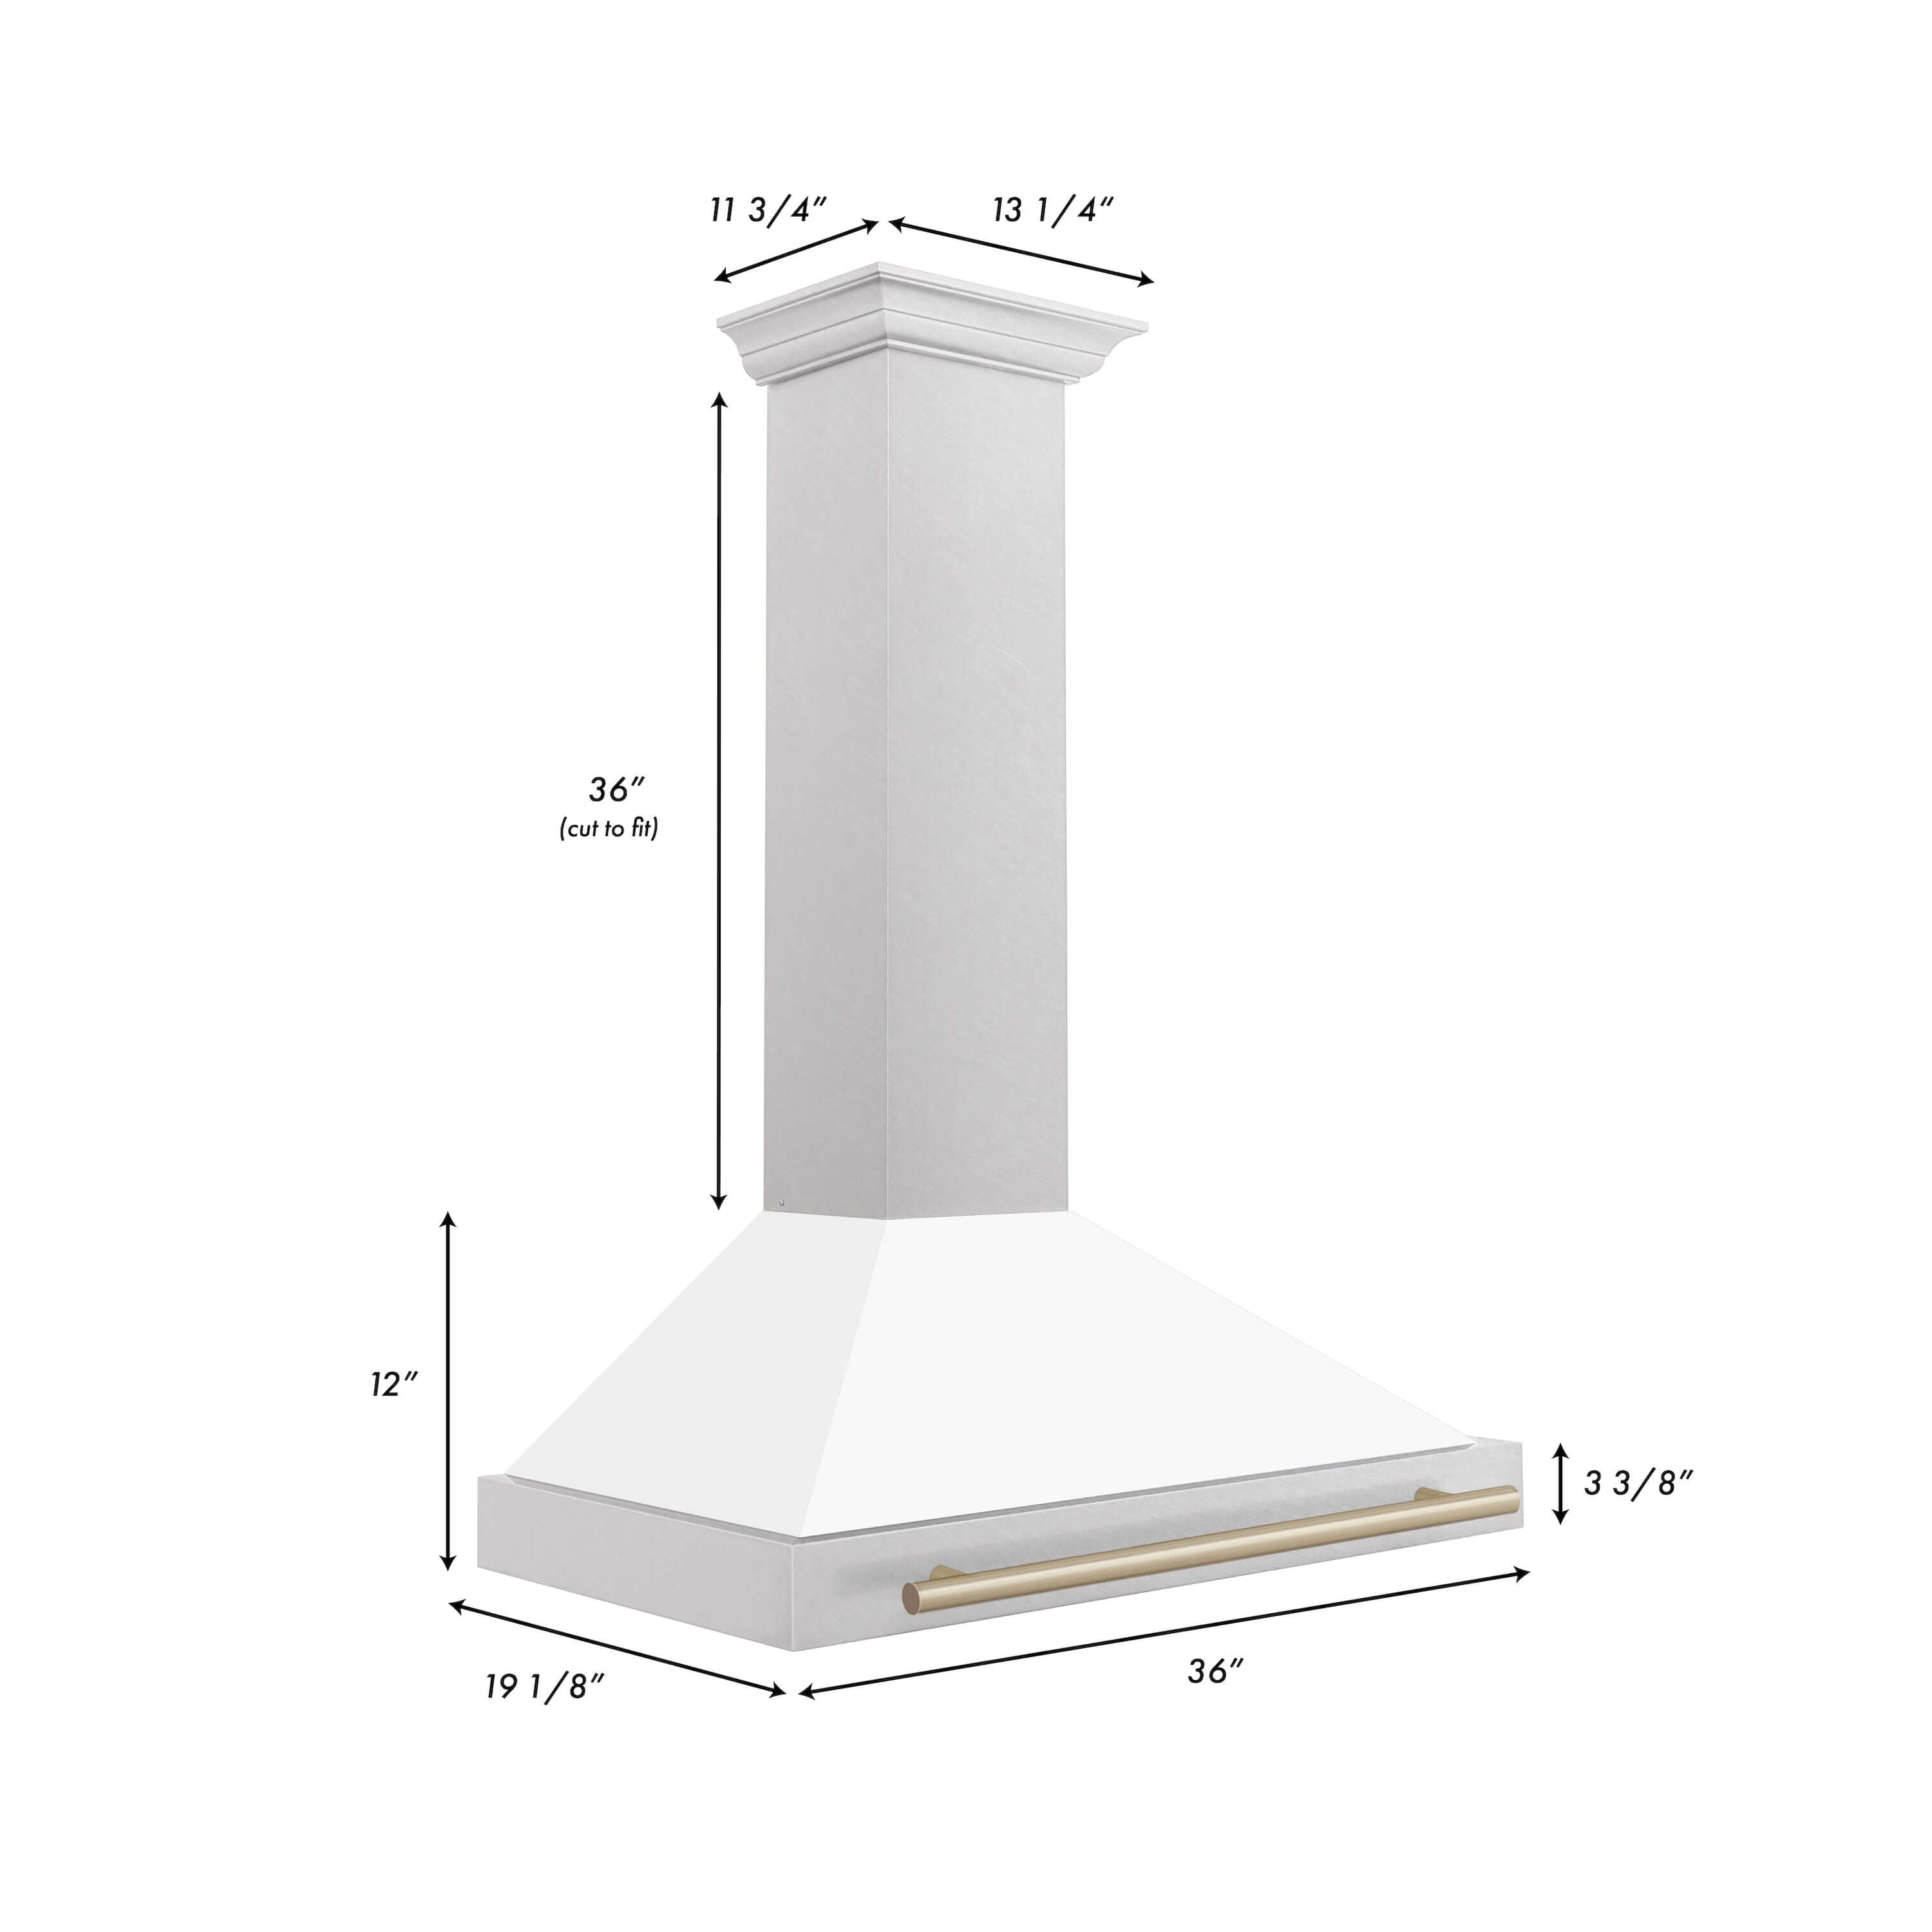 ZLINE 36 in. Autograph Edition in Fingerprint Resistant Stainless Steel Range Hood with White Matte Shell with Champagne Bronze Handle Dimensions